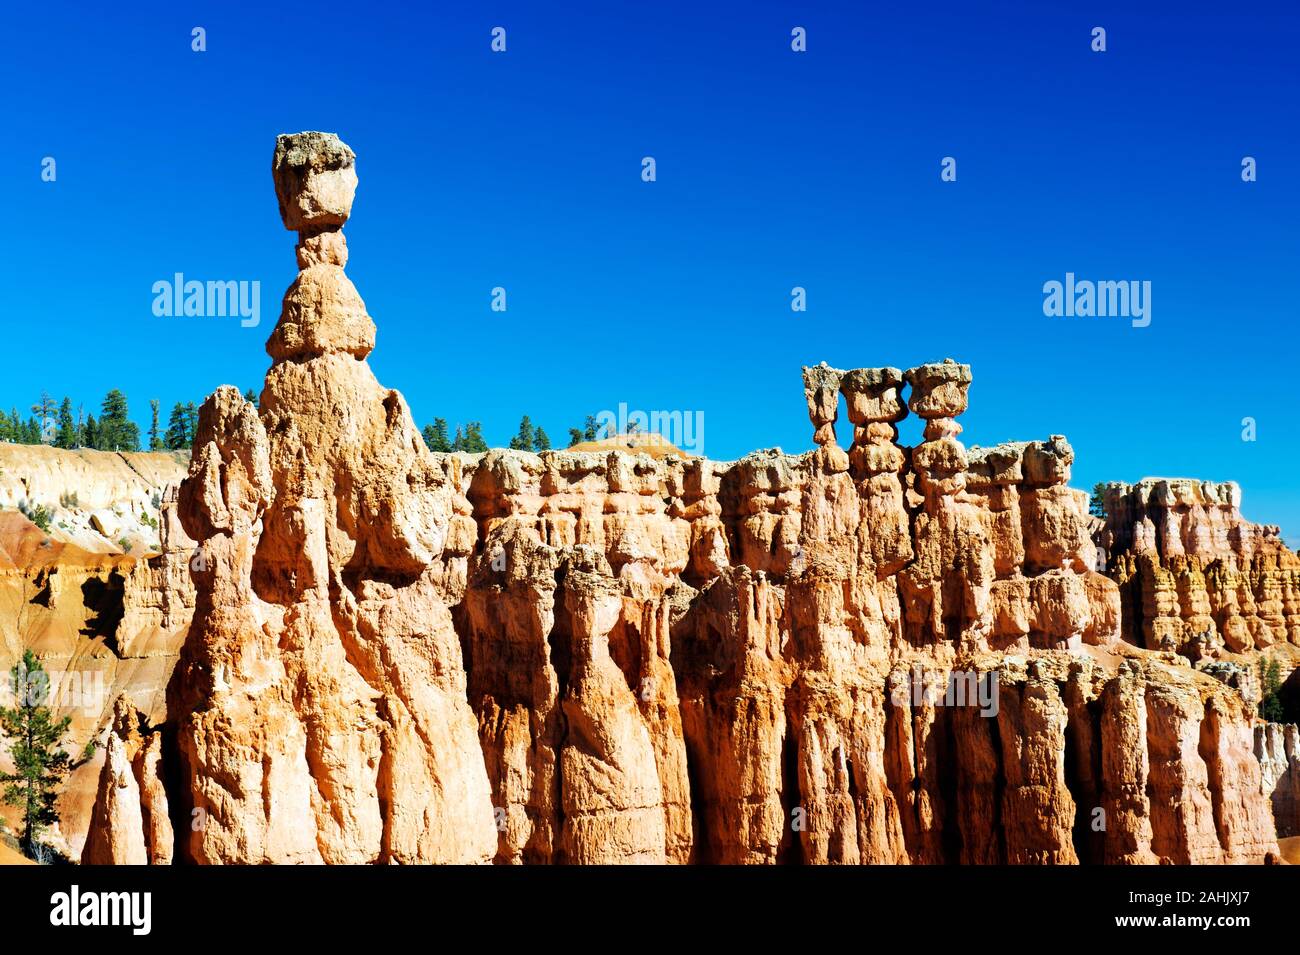 Thors Hammer and hoodoos against a blue sky, Bryce Canyon National Park, Utah, USA. Stock Photo